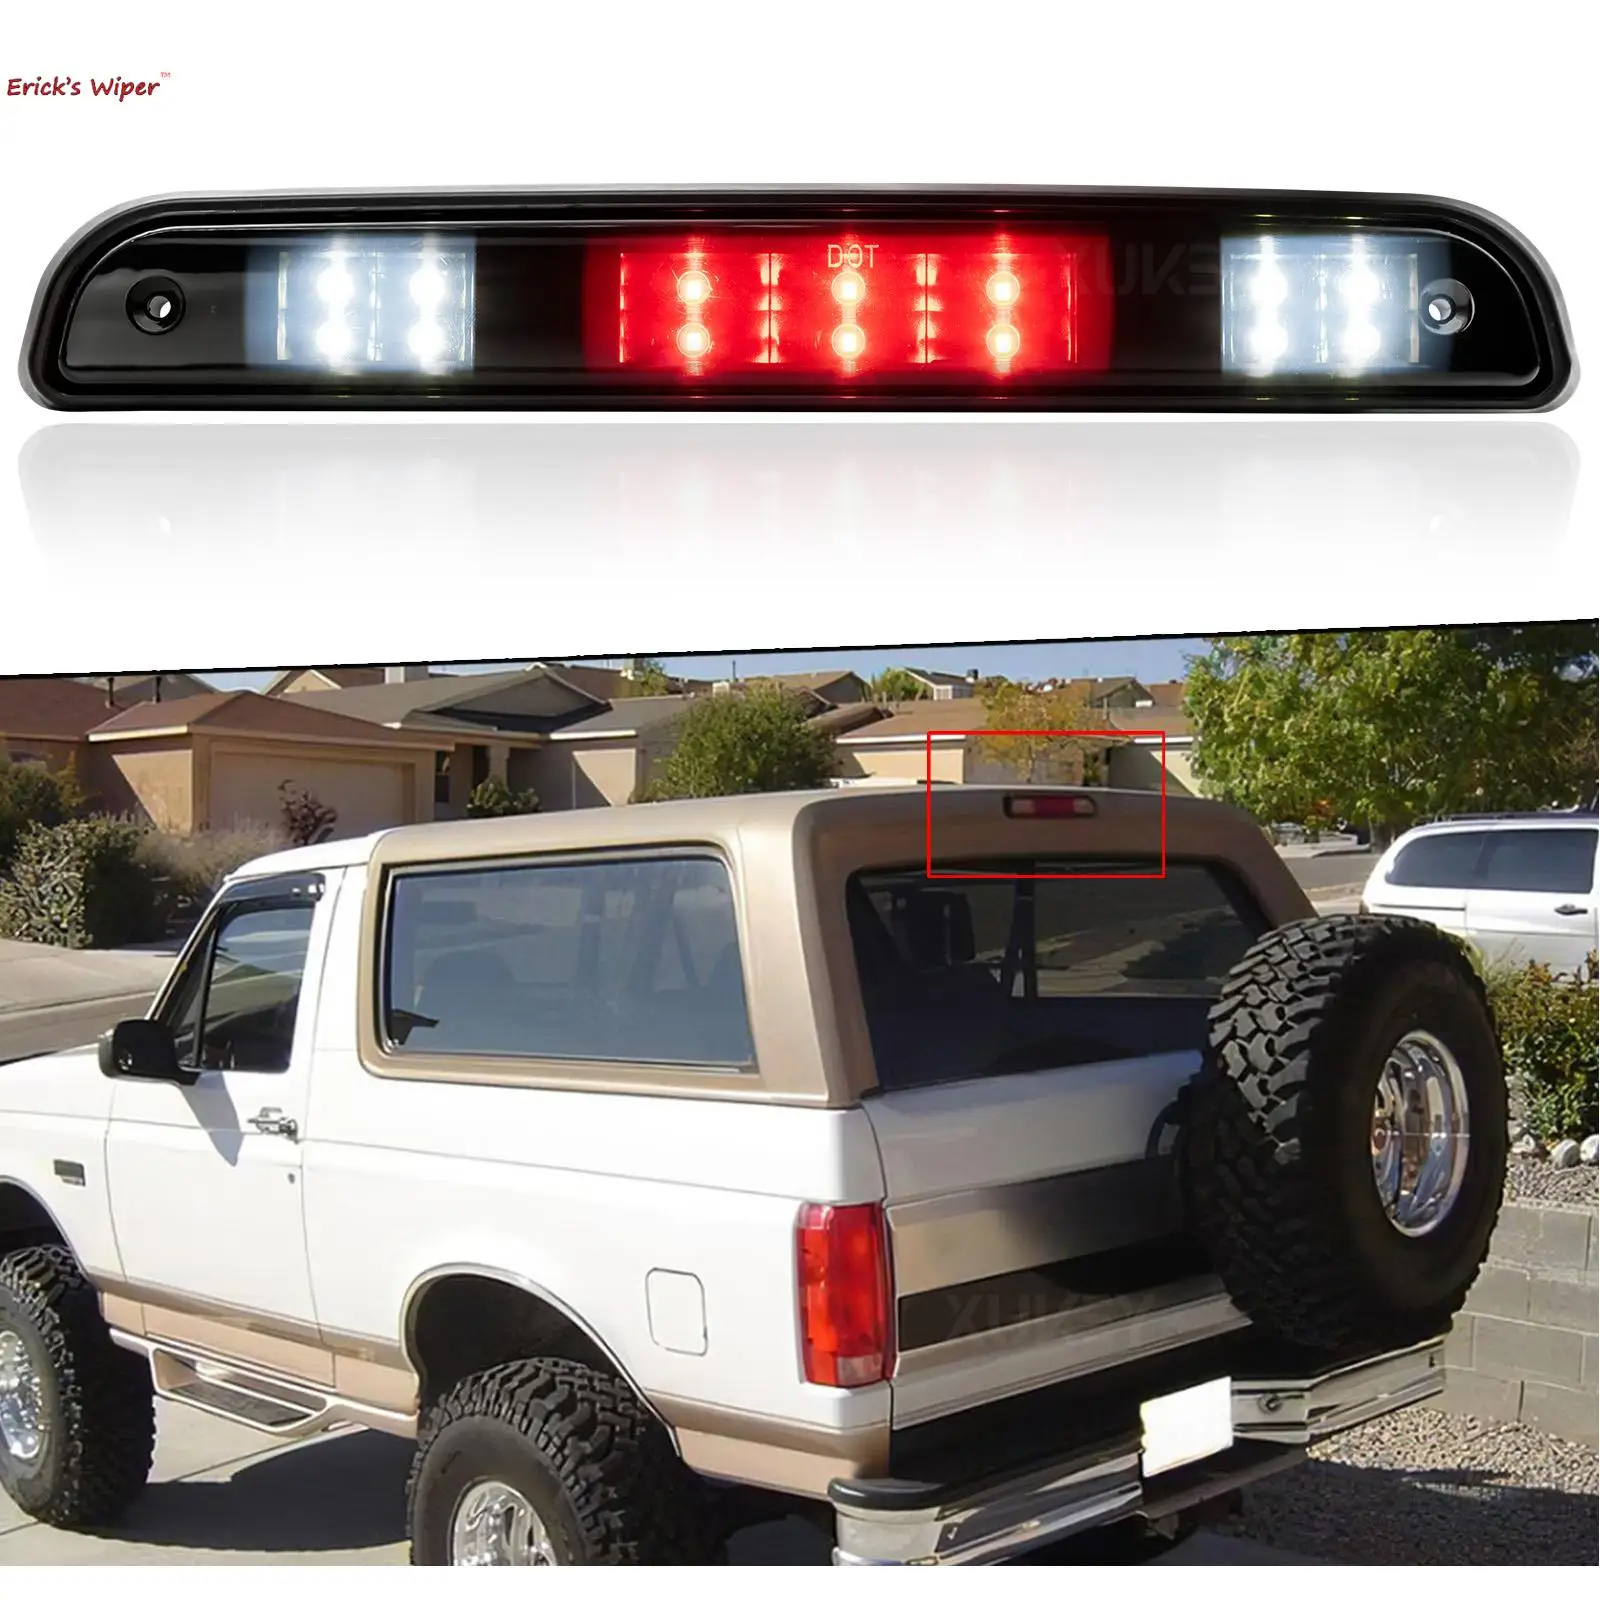 3rd Third Brake Light High Mount Stop Cargo Lamp Red White Top Roof Cabin Center LED For Ford F150 F250 F350 Bronco 1992-1996